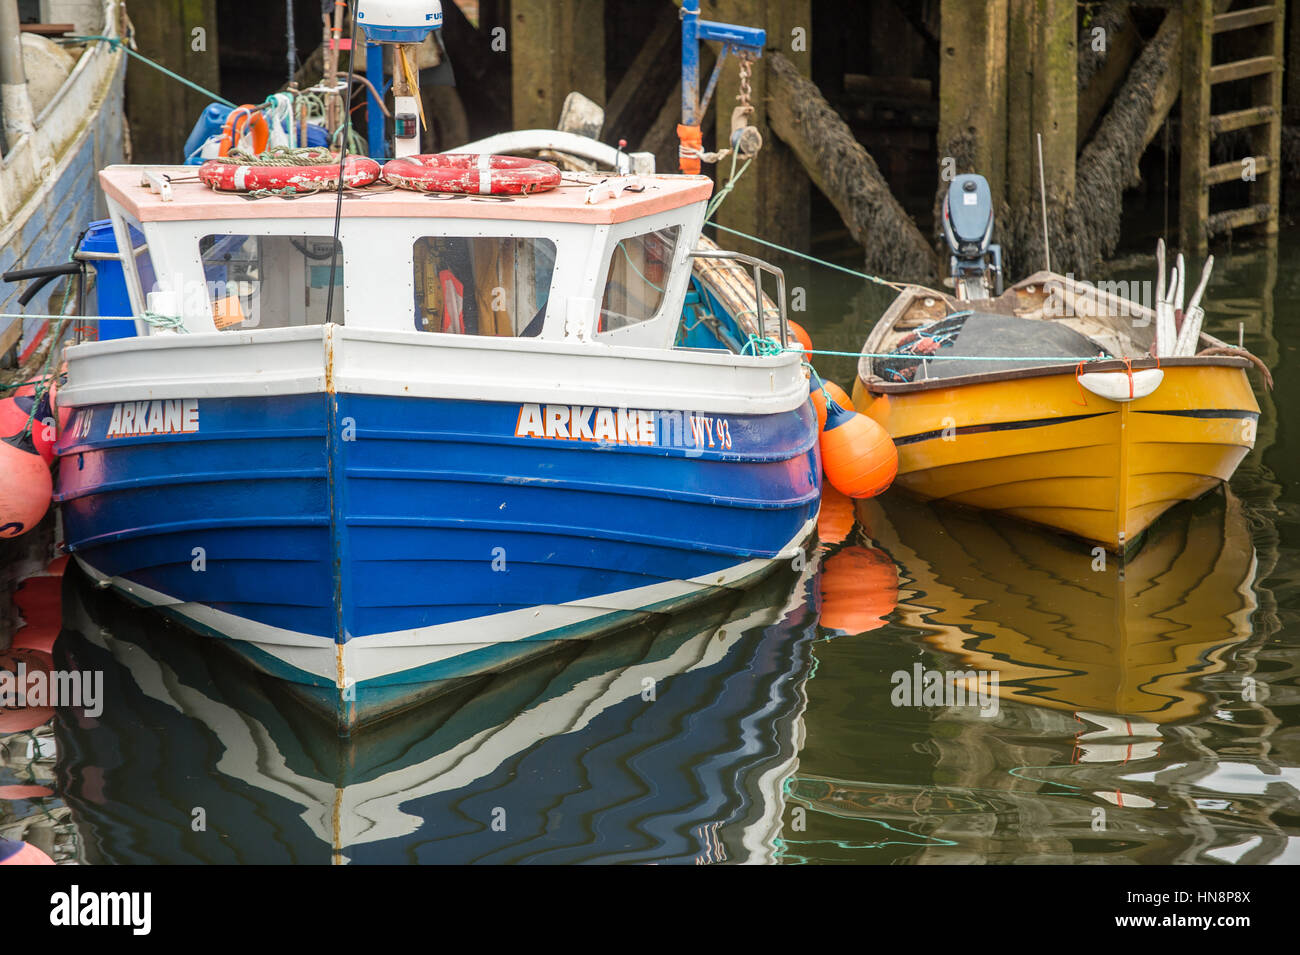 UK, England, Yorkshire - two boats docked together in the town of Whitby, England Stock Photo